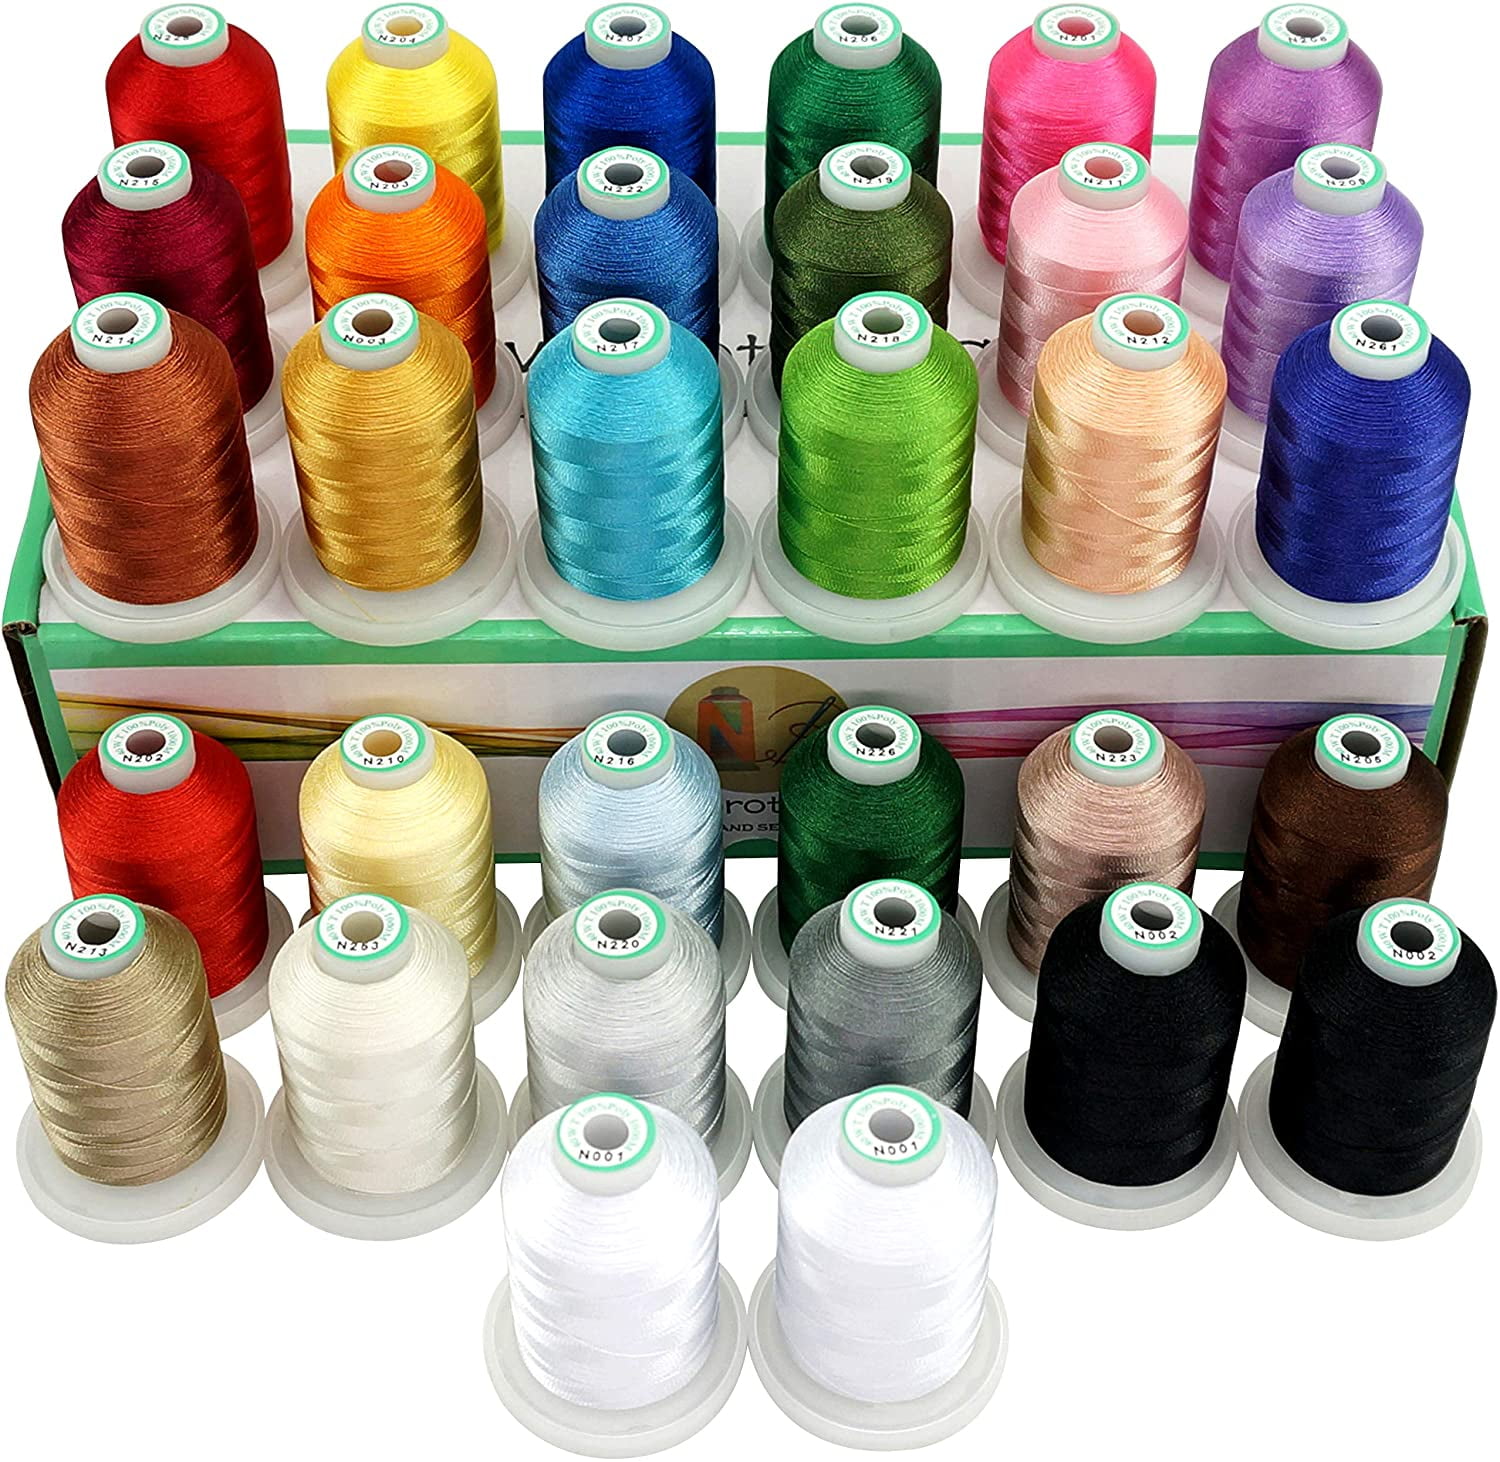 White Embroidery Bobbin Thread 90 Weight (Brother Embroidery Only Machines)  - 012502100737